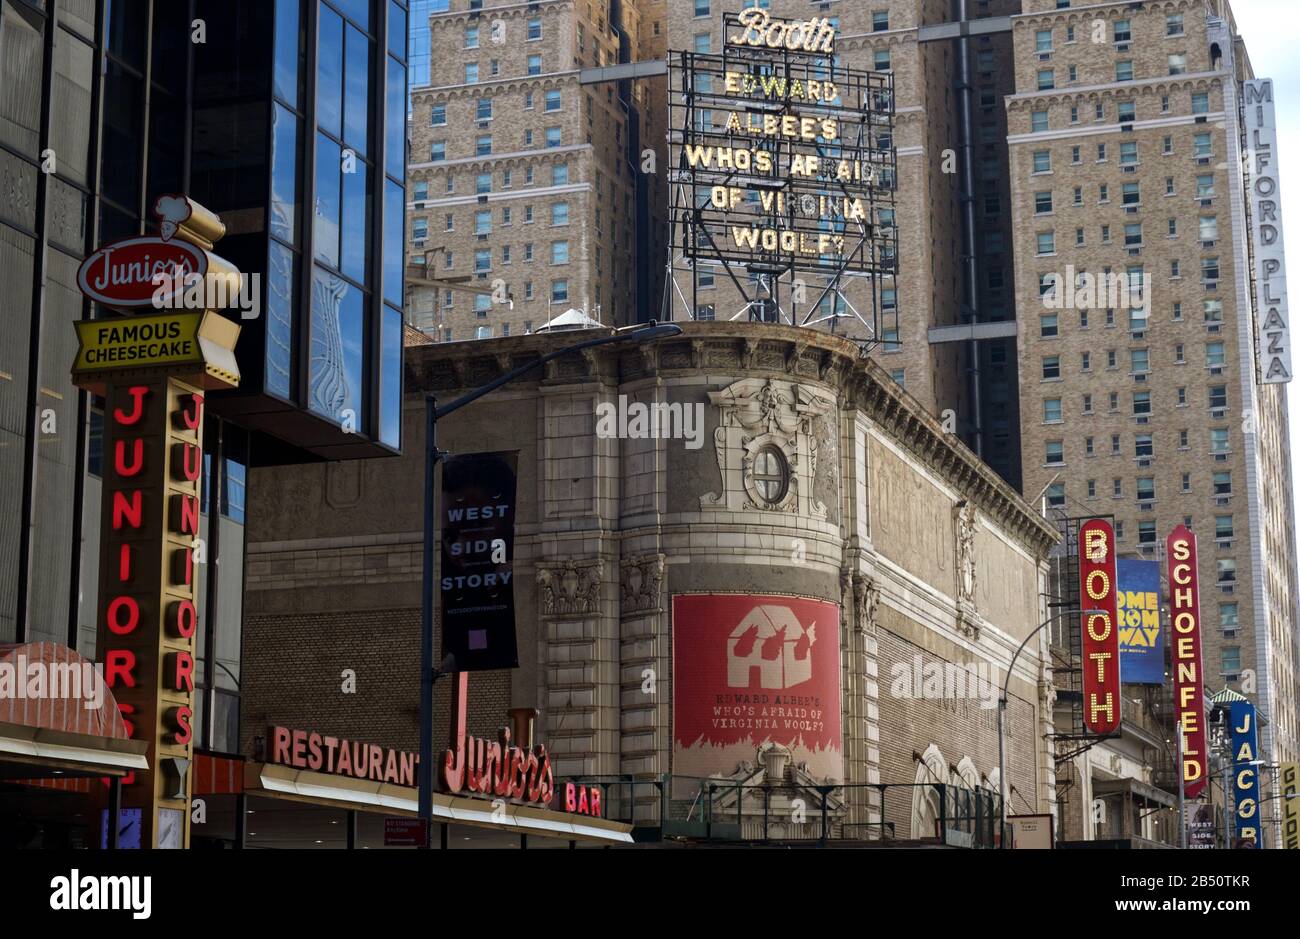 The Booth Theatre in midtown-Manhattan, NY Stock Photo